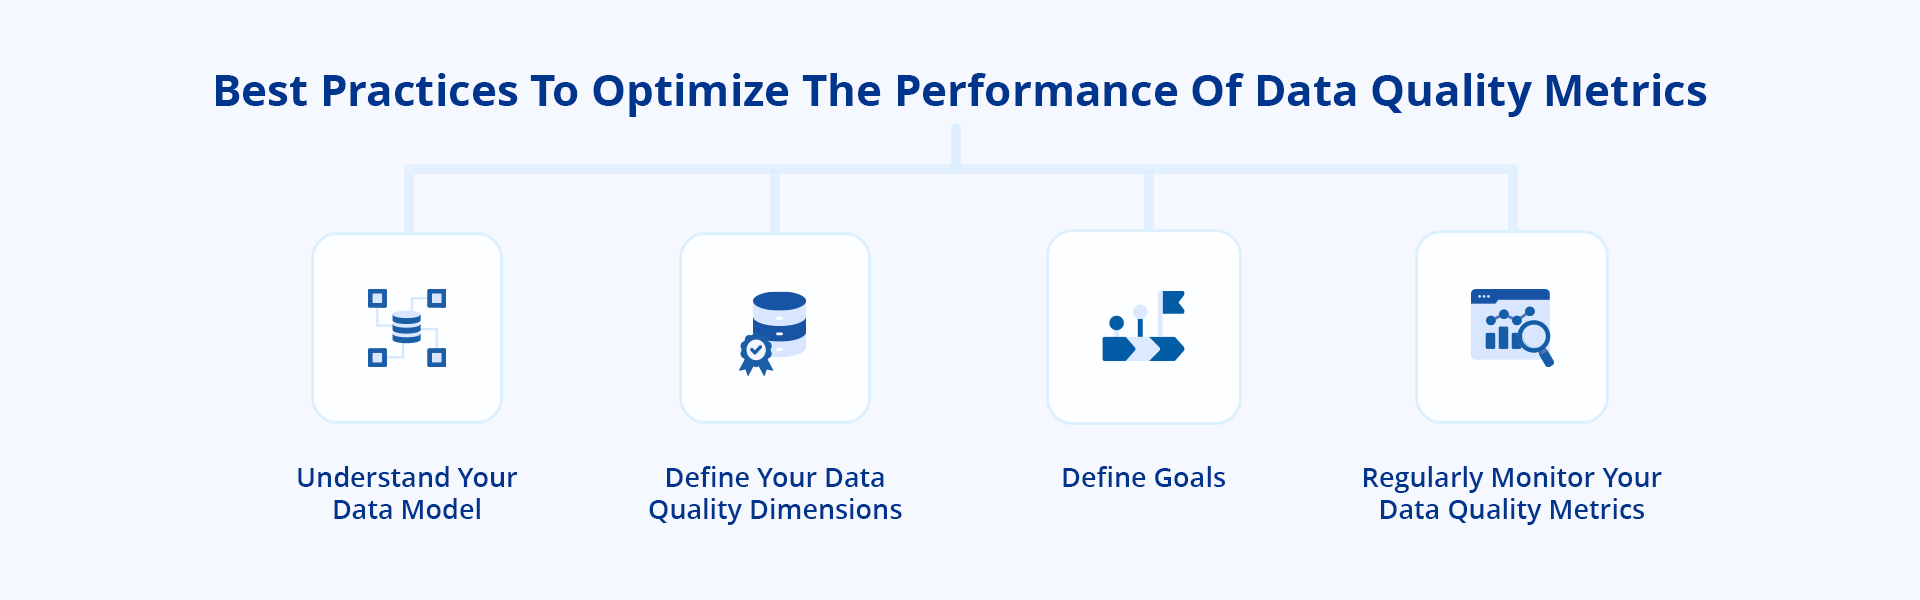 Best Practices to Optimize the Performance of Data Quality metrics 